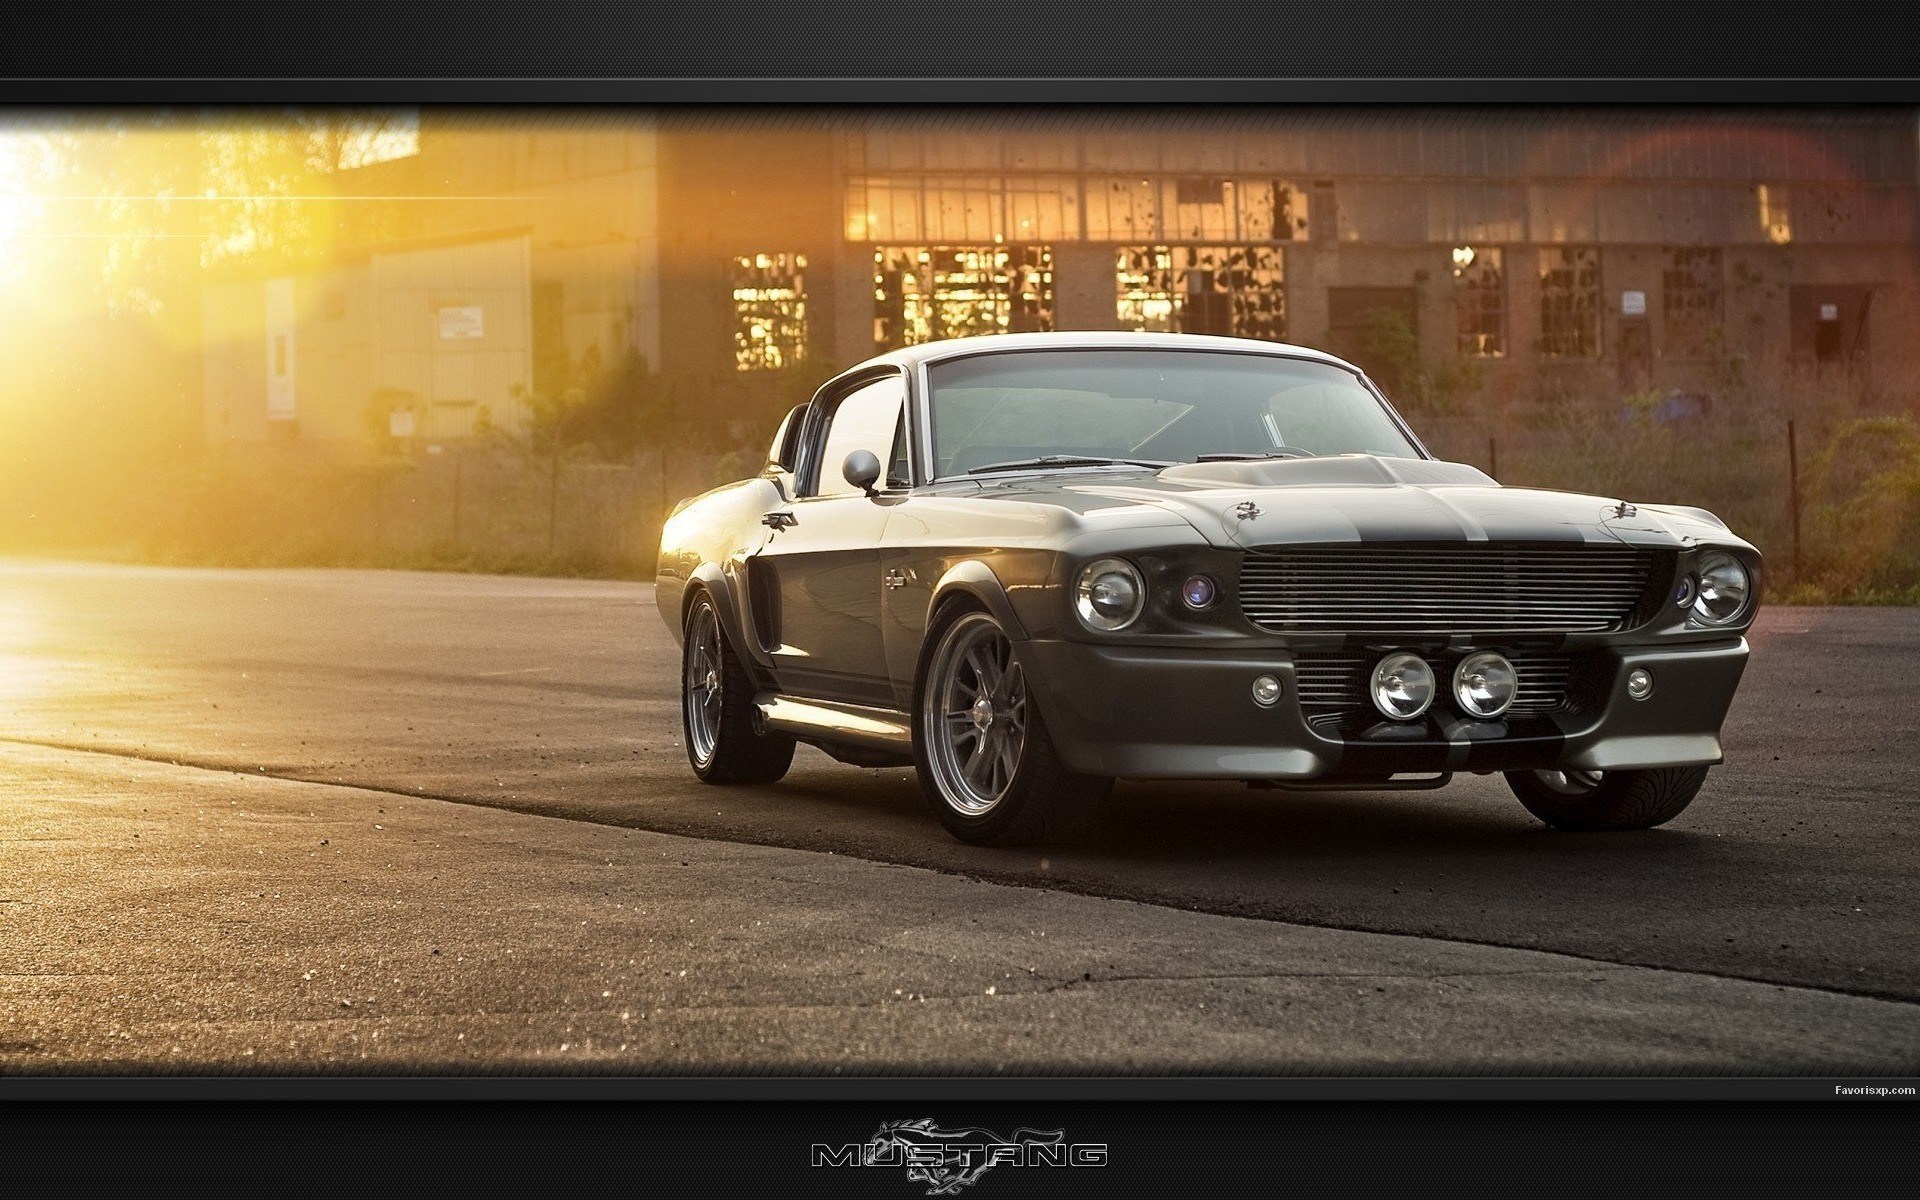 1967 Shelby Gt500 Eleanor Wallpaper 69 Images Photo - Ford Mustang Shelby Gt500 Eleanor , HD Wallpaper & Backgrounds